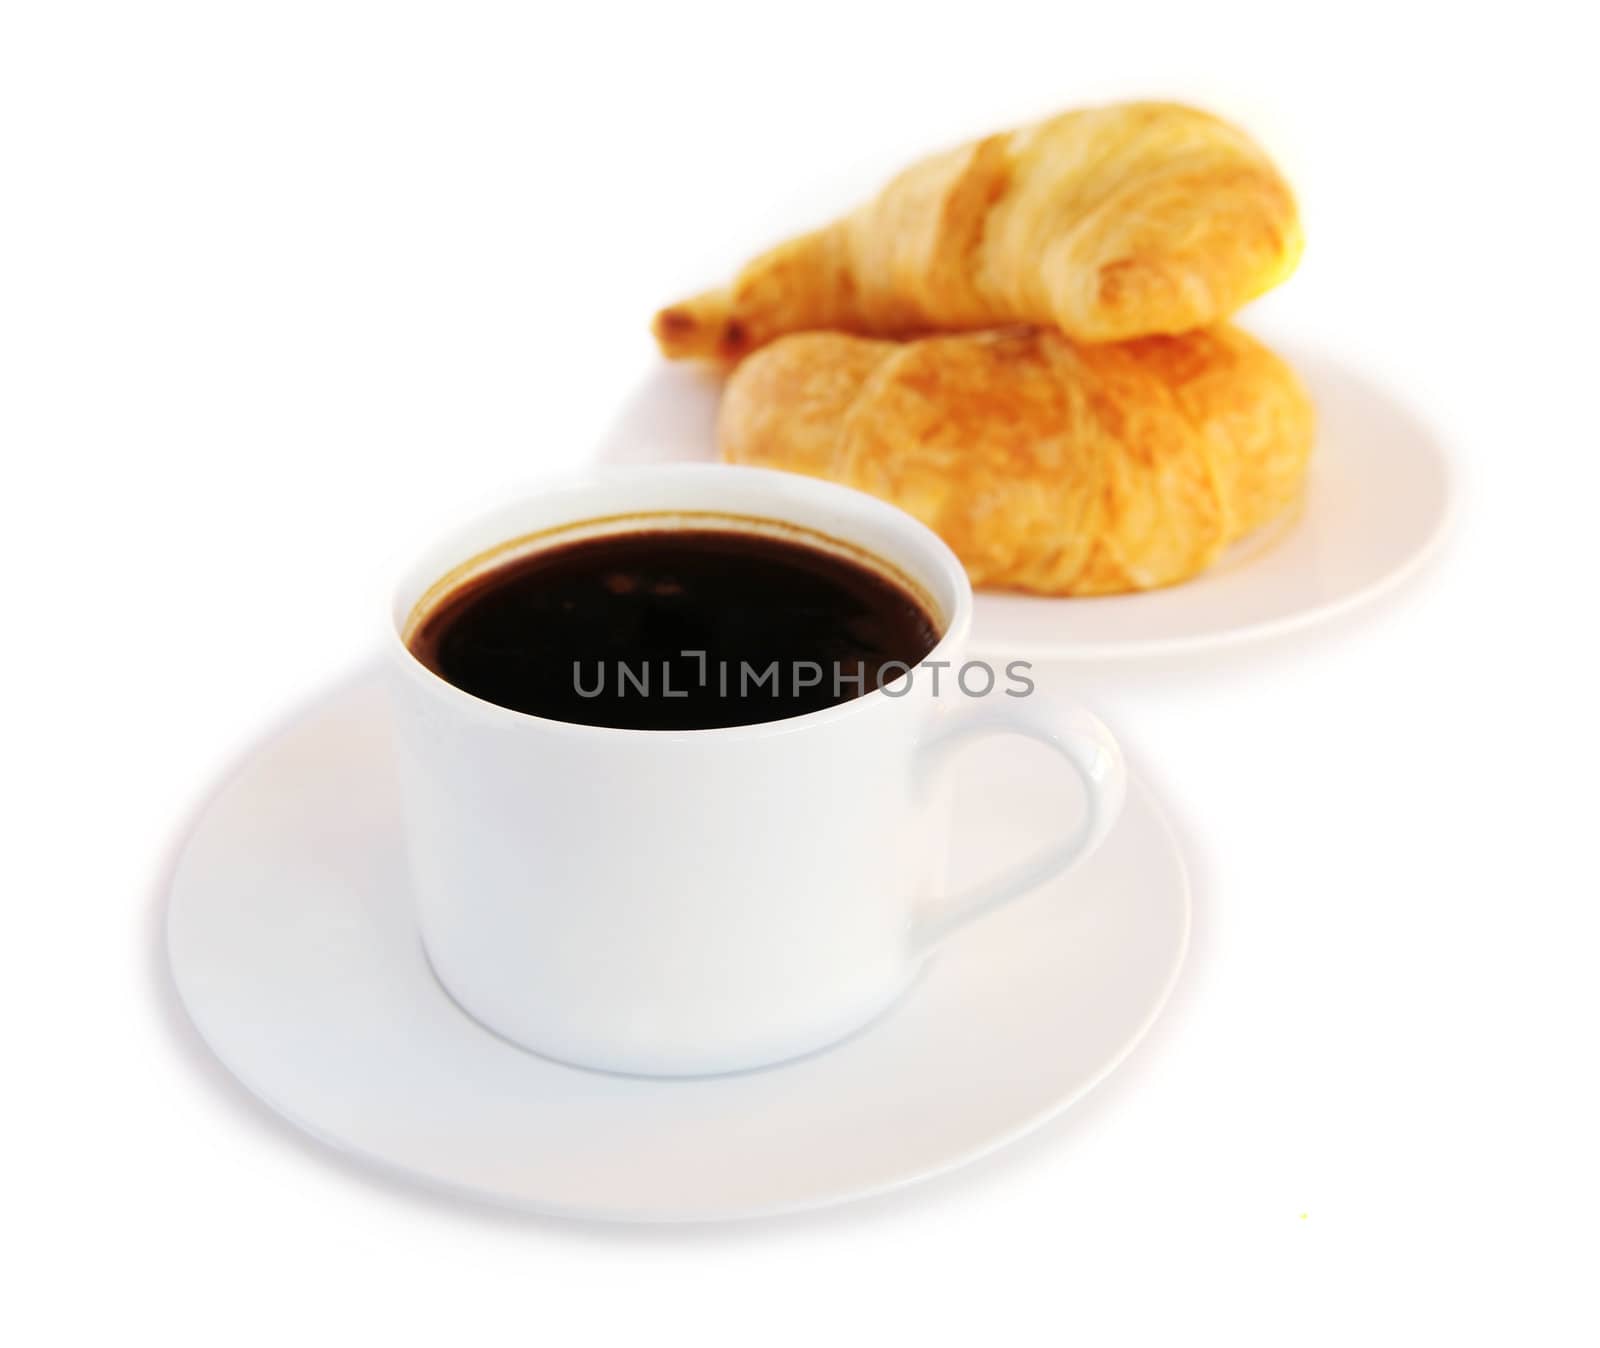 Breaksfast of black coffee and fresh croissants isolated on white background